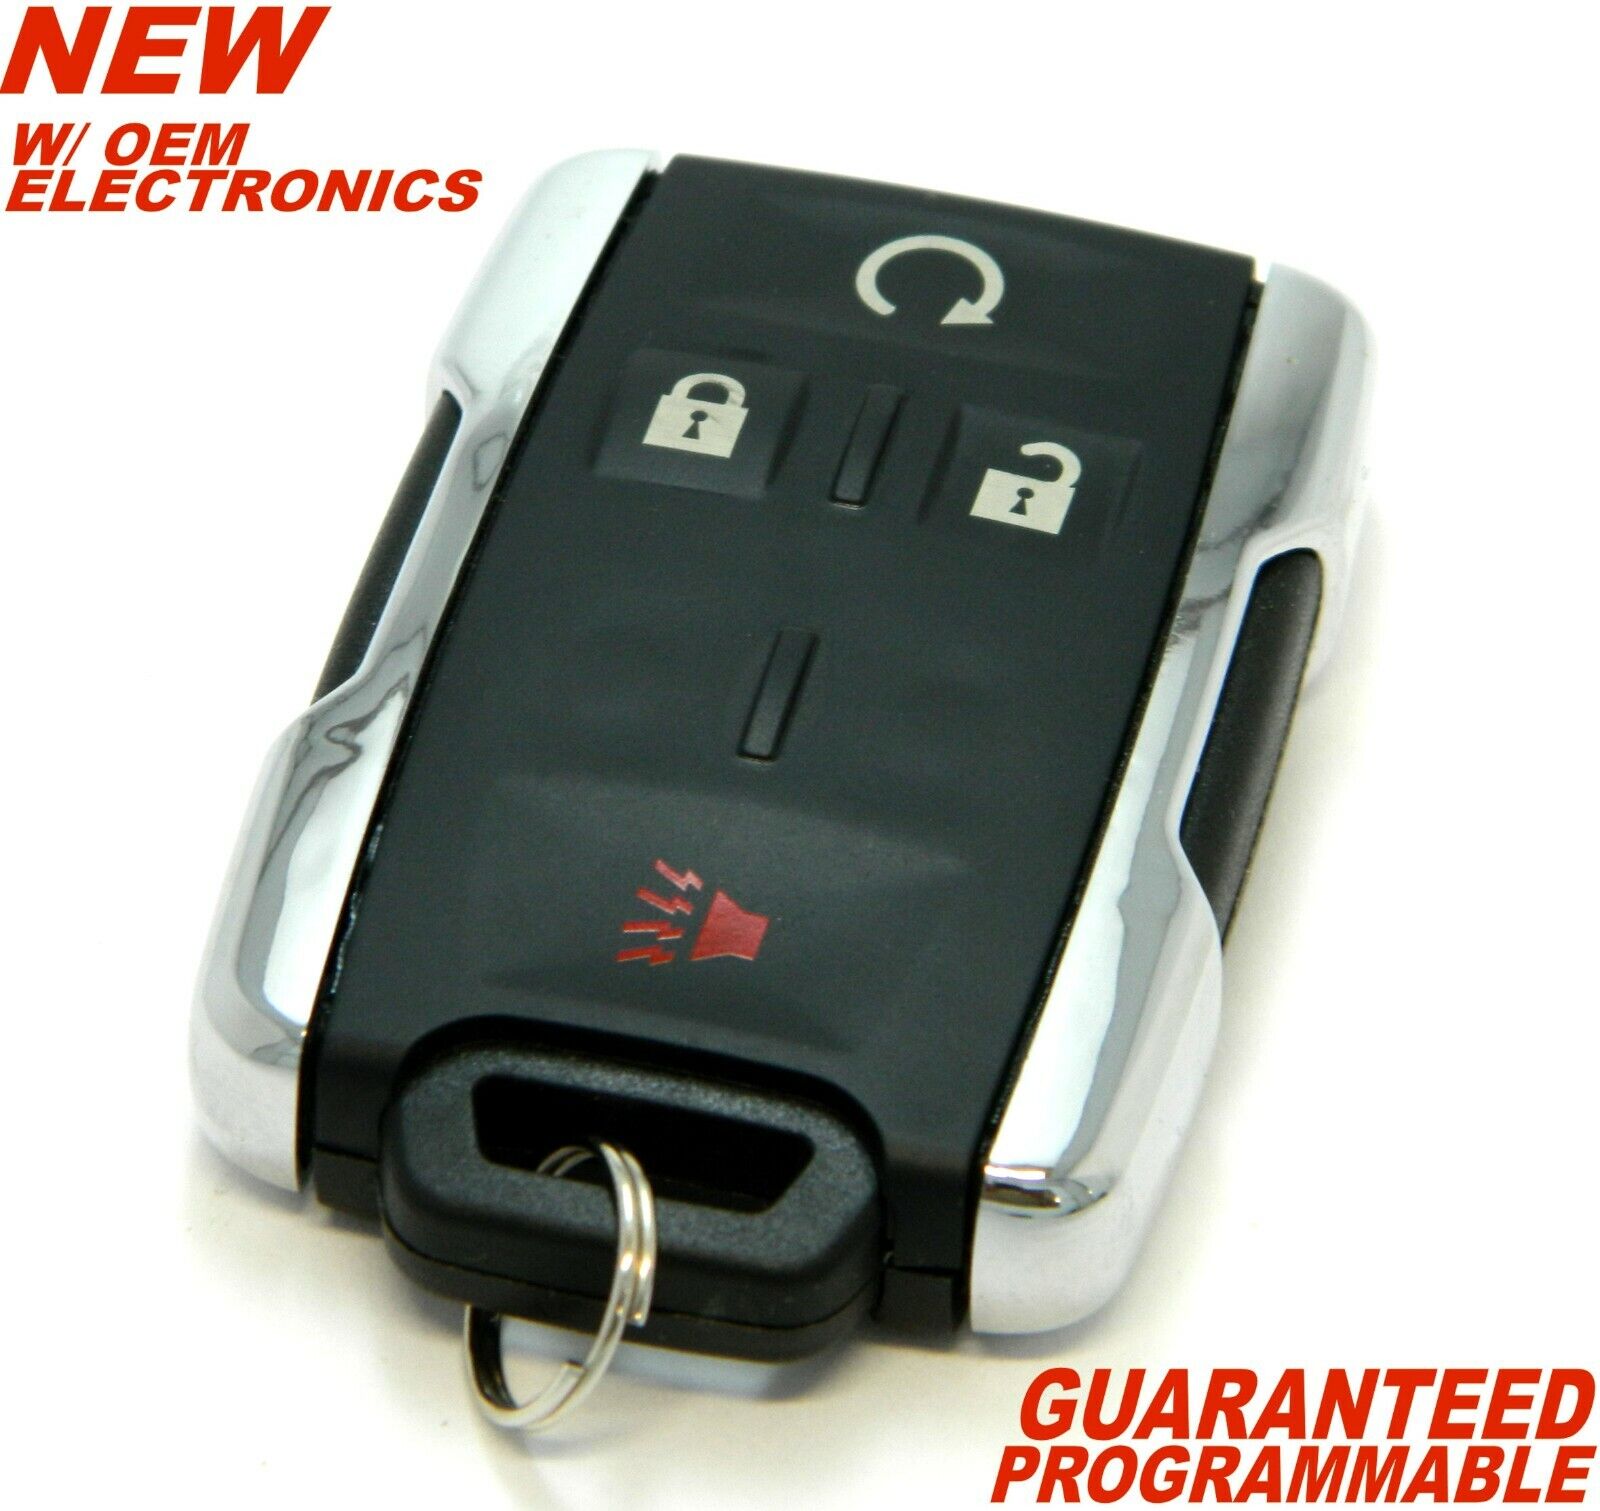 OEM ELECTRONIC 4 BUTTON REMOTE START KEY FOB FOR 2014-2020 GMC SIERRA